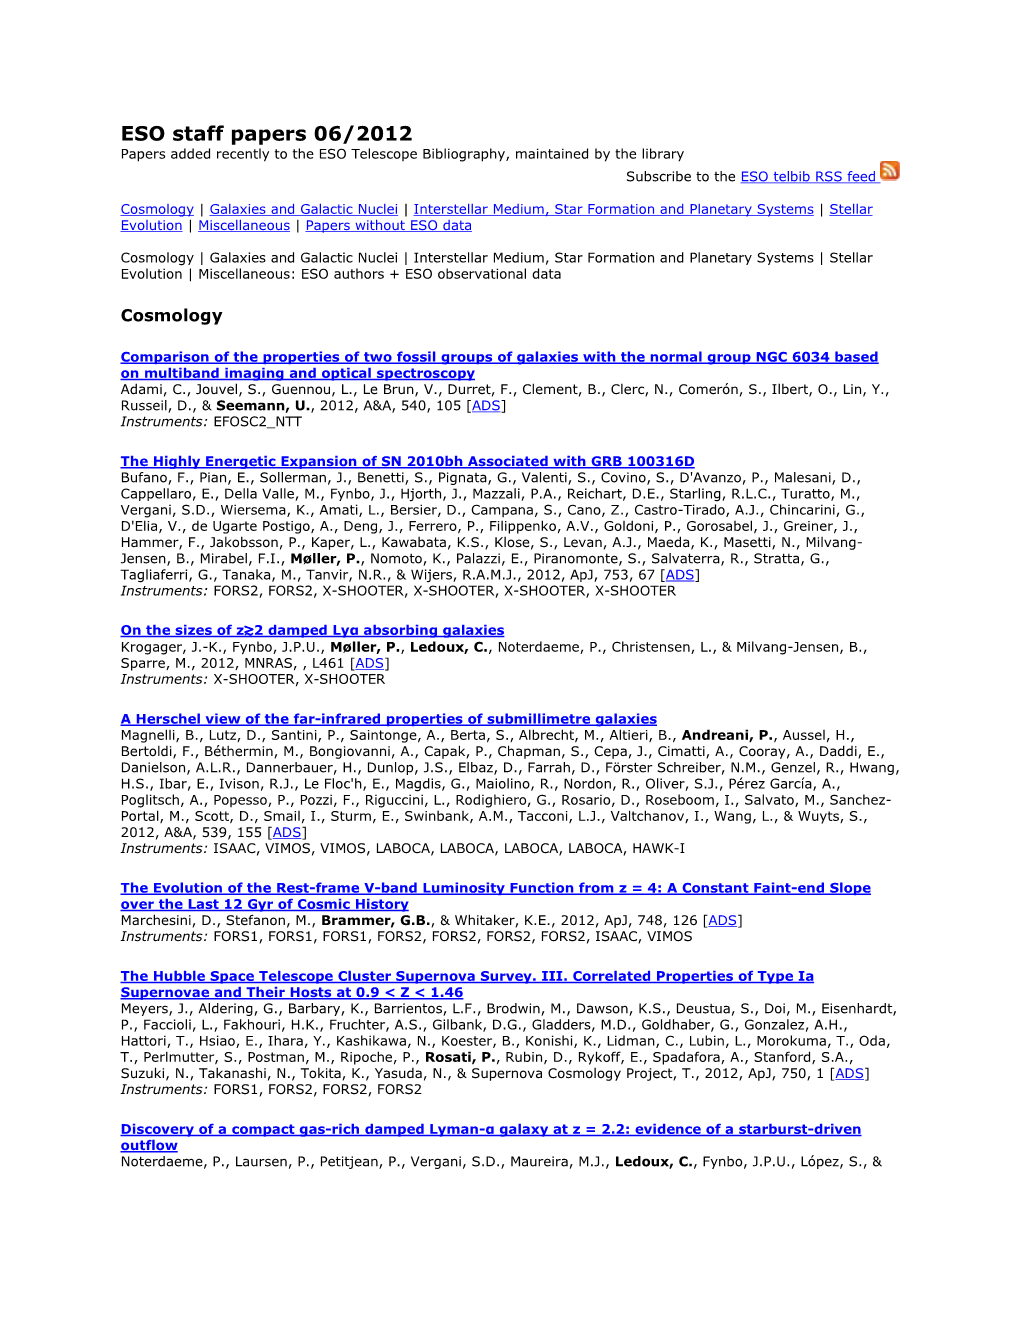 ESO Staff Papers 06/2012 Papers Added Recently to the ESO Telescope Bibliography, Maintained by the Library Subscribe to the ESO Telbib RSS Feed